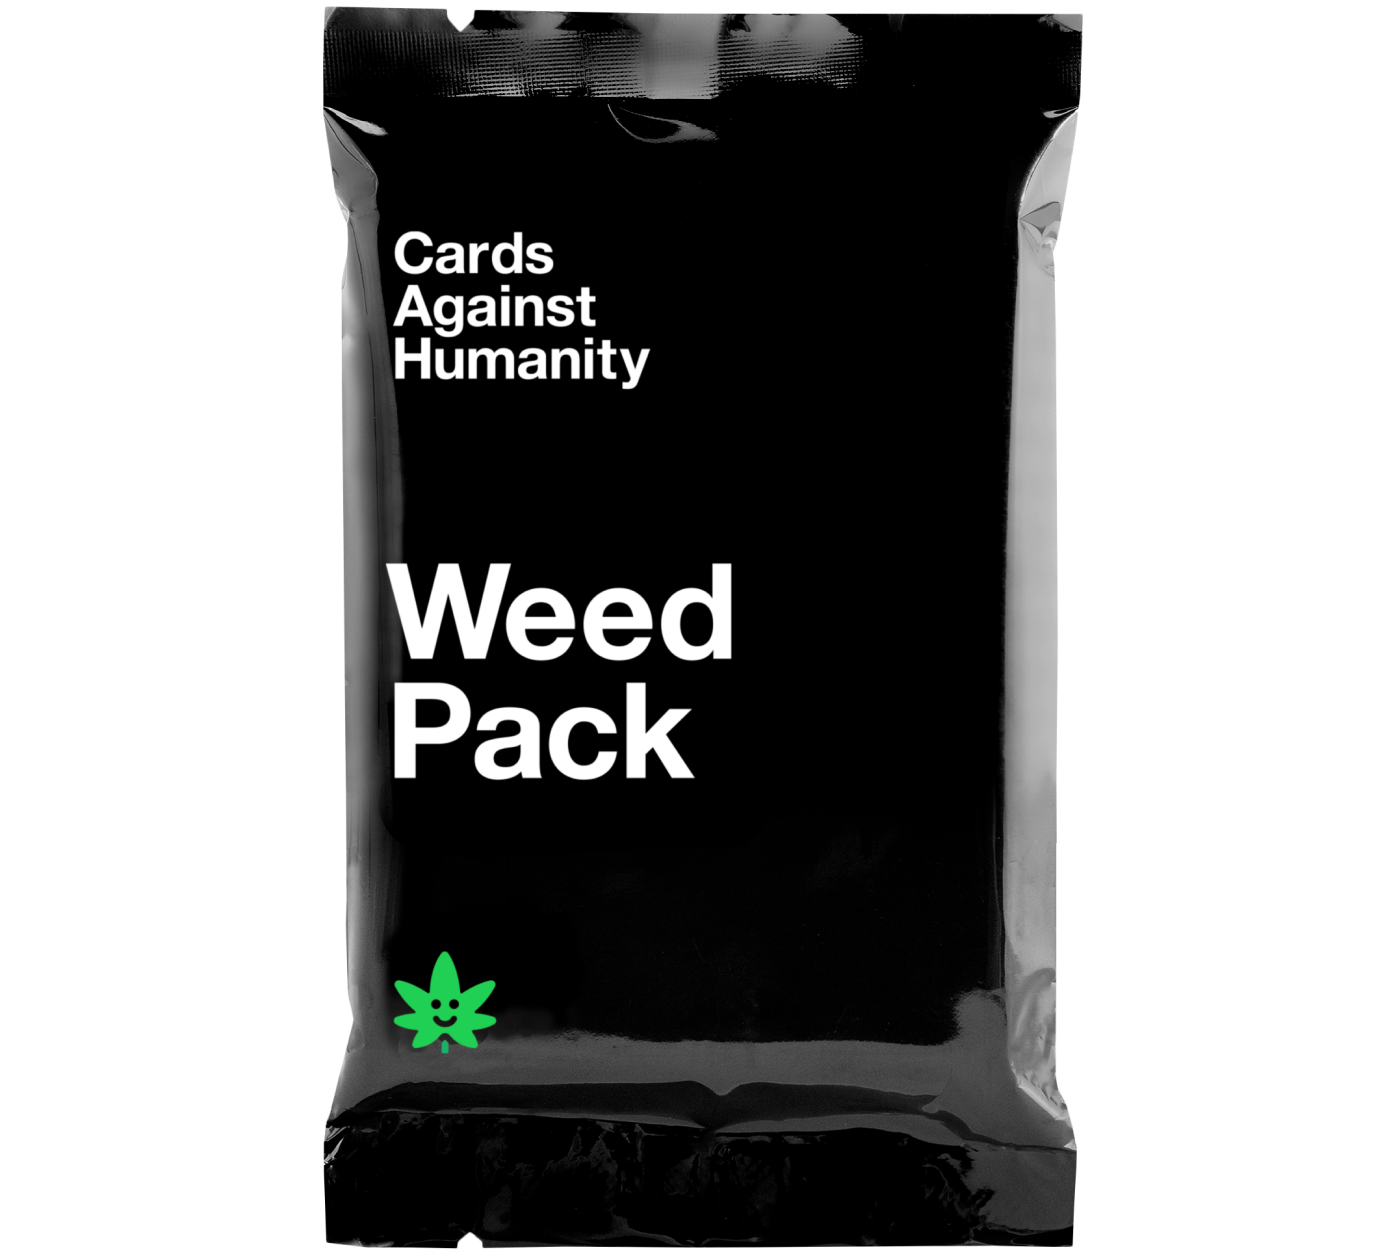 Weed Pack Cards Against Humanity New Sealed Original Expansion Pack 